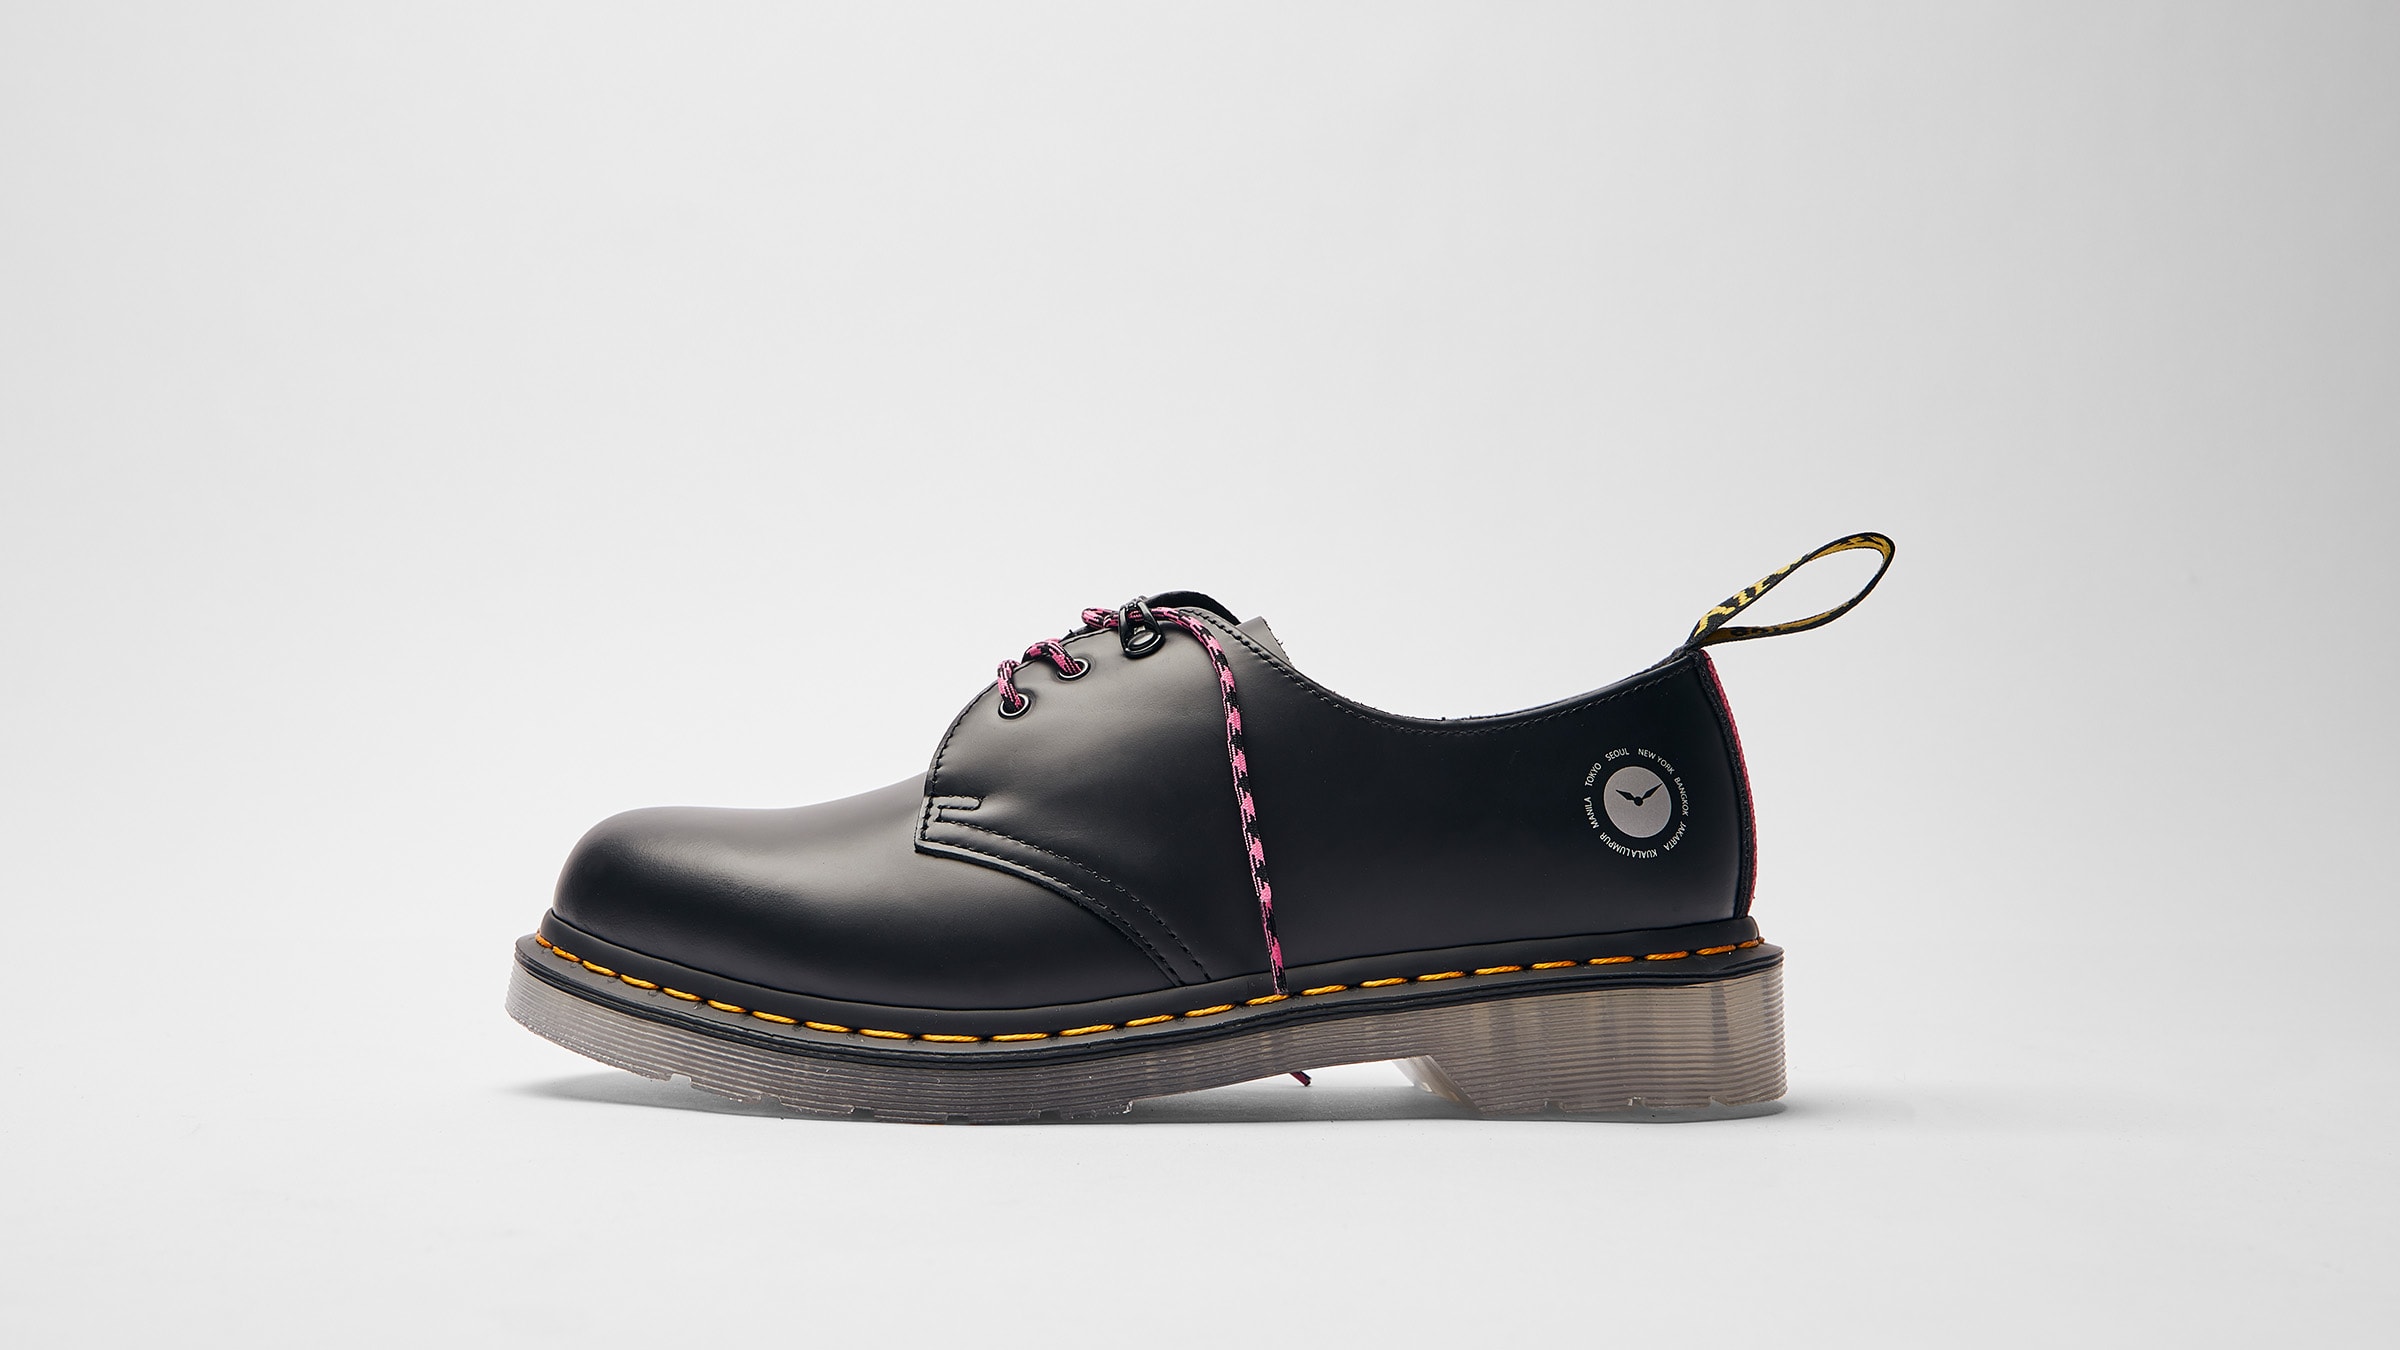 Dr. Martens x Atmos 1461 Shoe (Black Smooth) | END. Launches